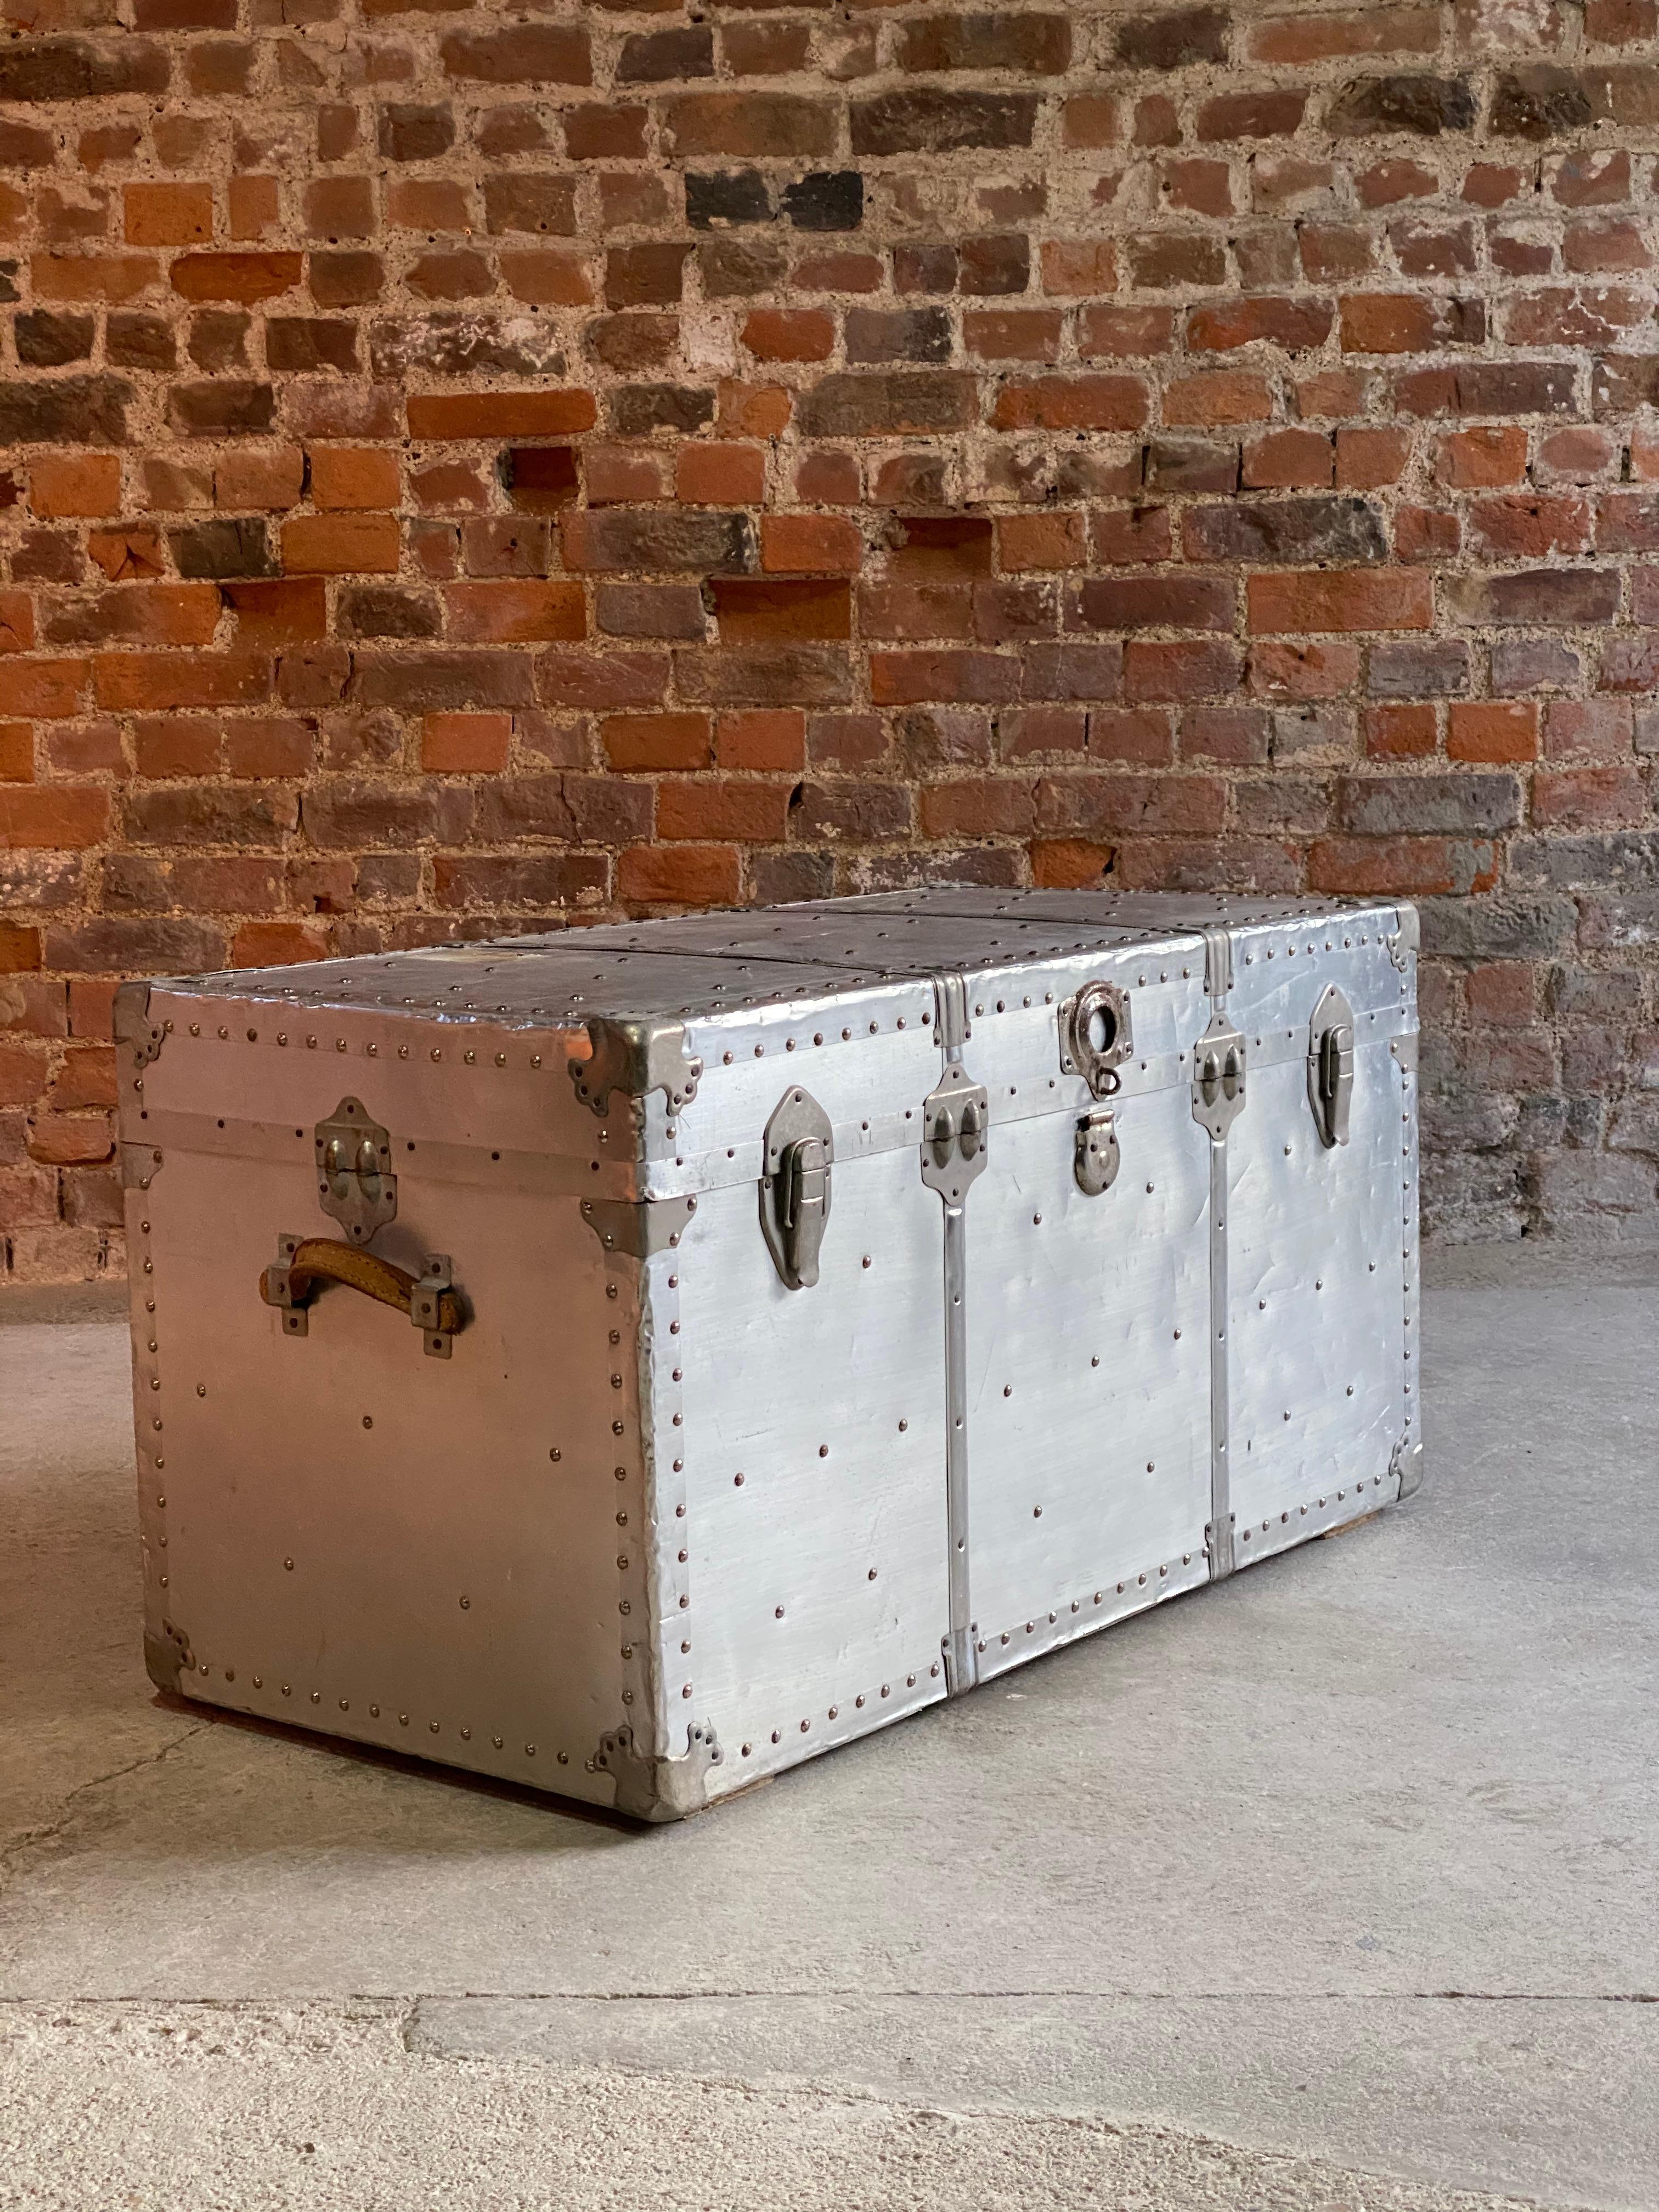 Industrial aviation aluminium travel trunk coffee table, circa 1940

Industrial aviation aluminium travel trunk circa 1940, a genuine travelling trunk with hinged lid, the trunk having studded outline and heavy locks and clasps, riveted all-over